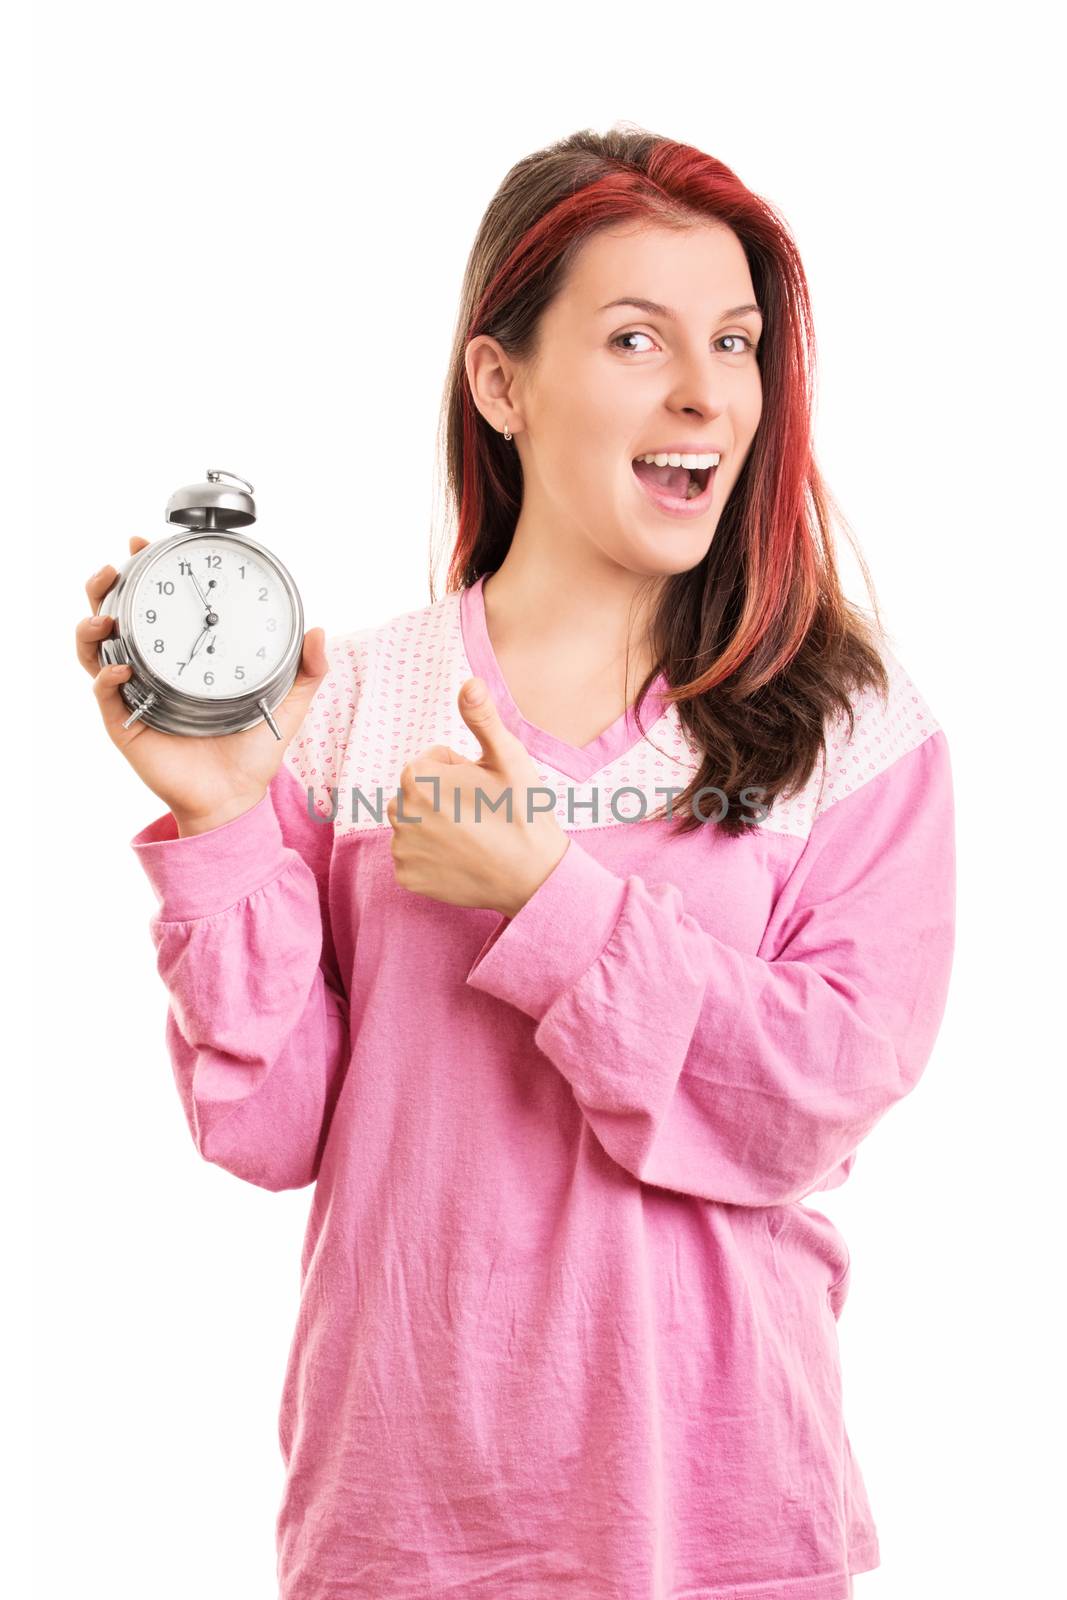 Young girl holding an alarm clock and thumbs up by Mendelex